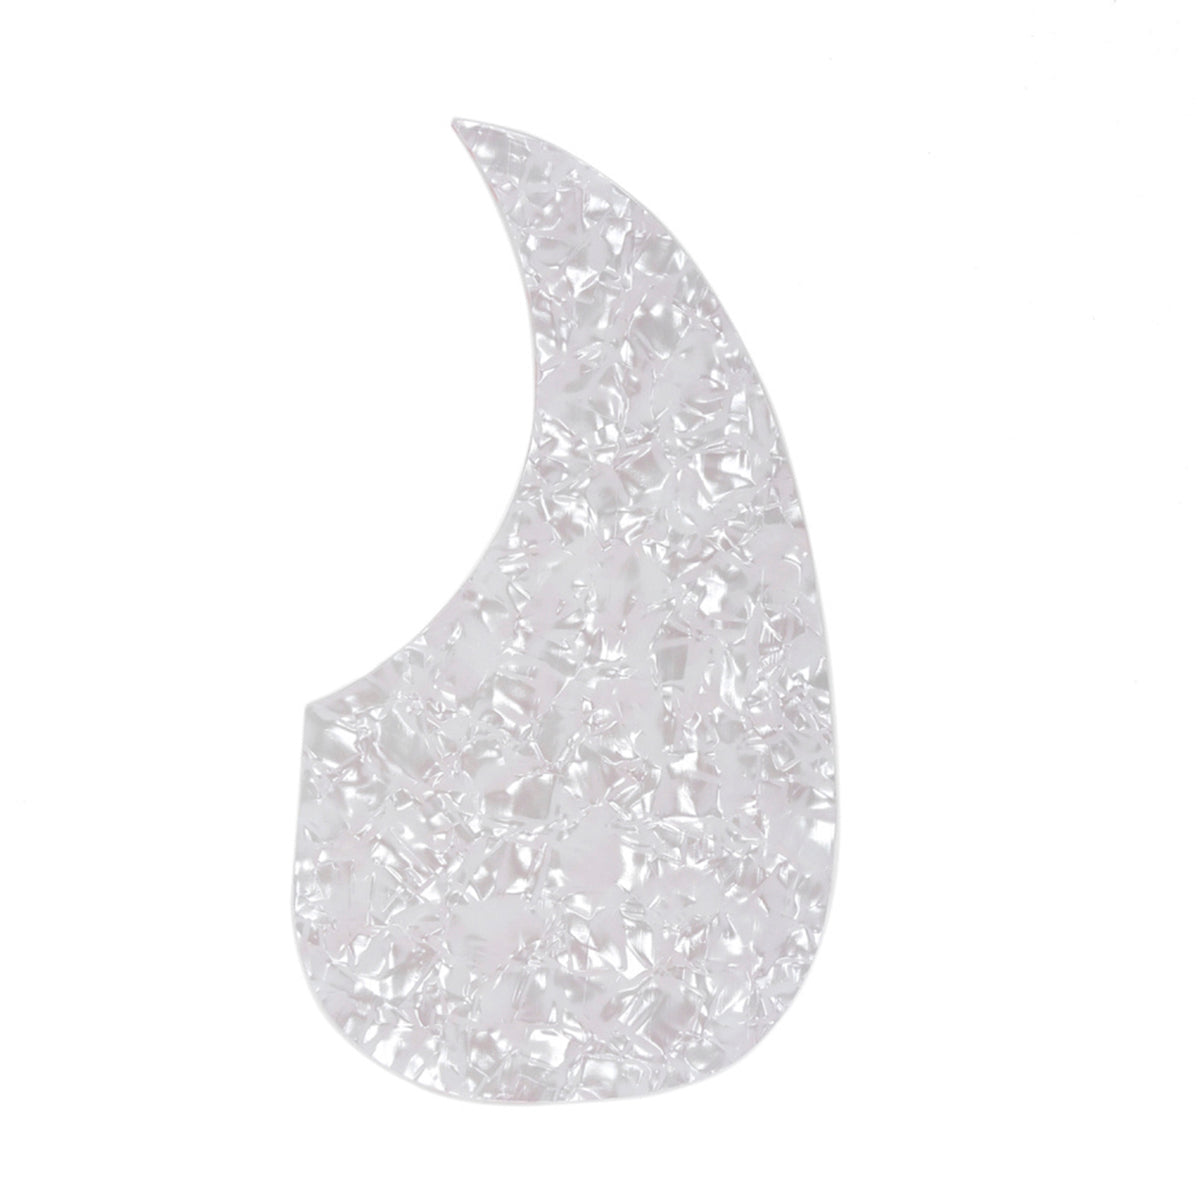 Musiclily Oversize Teardrop Acoustic Guitar Self-adhesive Pickguard for Martin D28 Style guitar,White Pearl